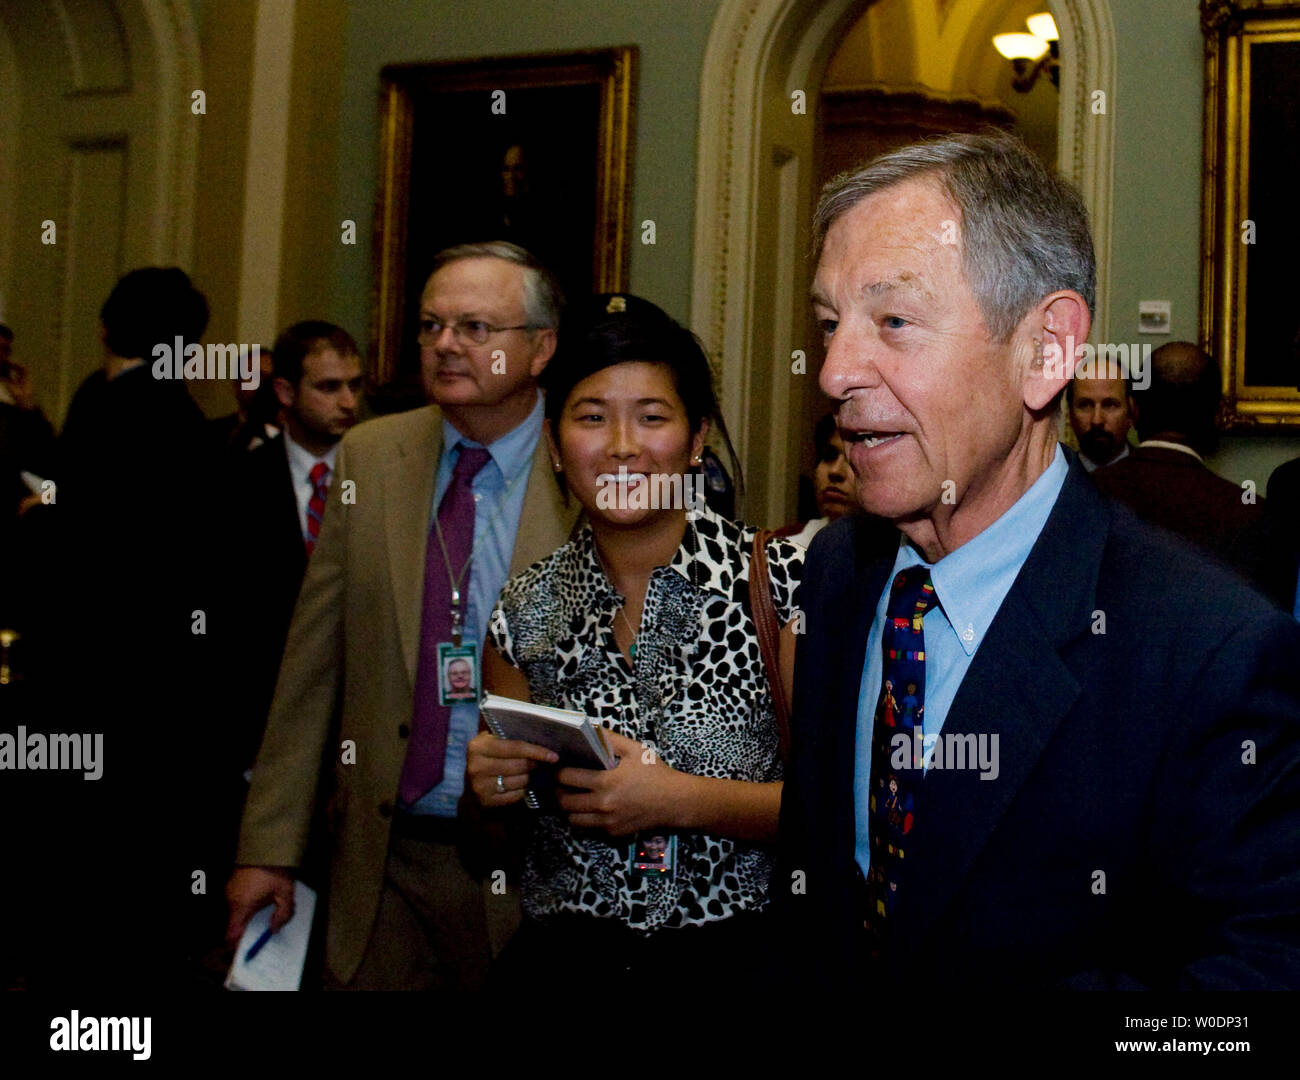 Sen. George Voinovich (R-OH) walks through the East Clock Corridor on Capitol Hill in Washington on June 26, 2007. Voinovich voted for cloture on the Immigration Bill. The Senate passed the cloture vote for the Immigration Bill 64-35. (UPI Photo/Dominic Bracco II) Stock Photo